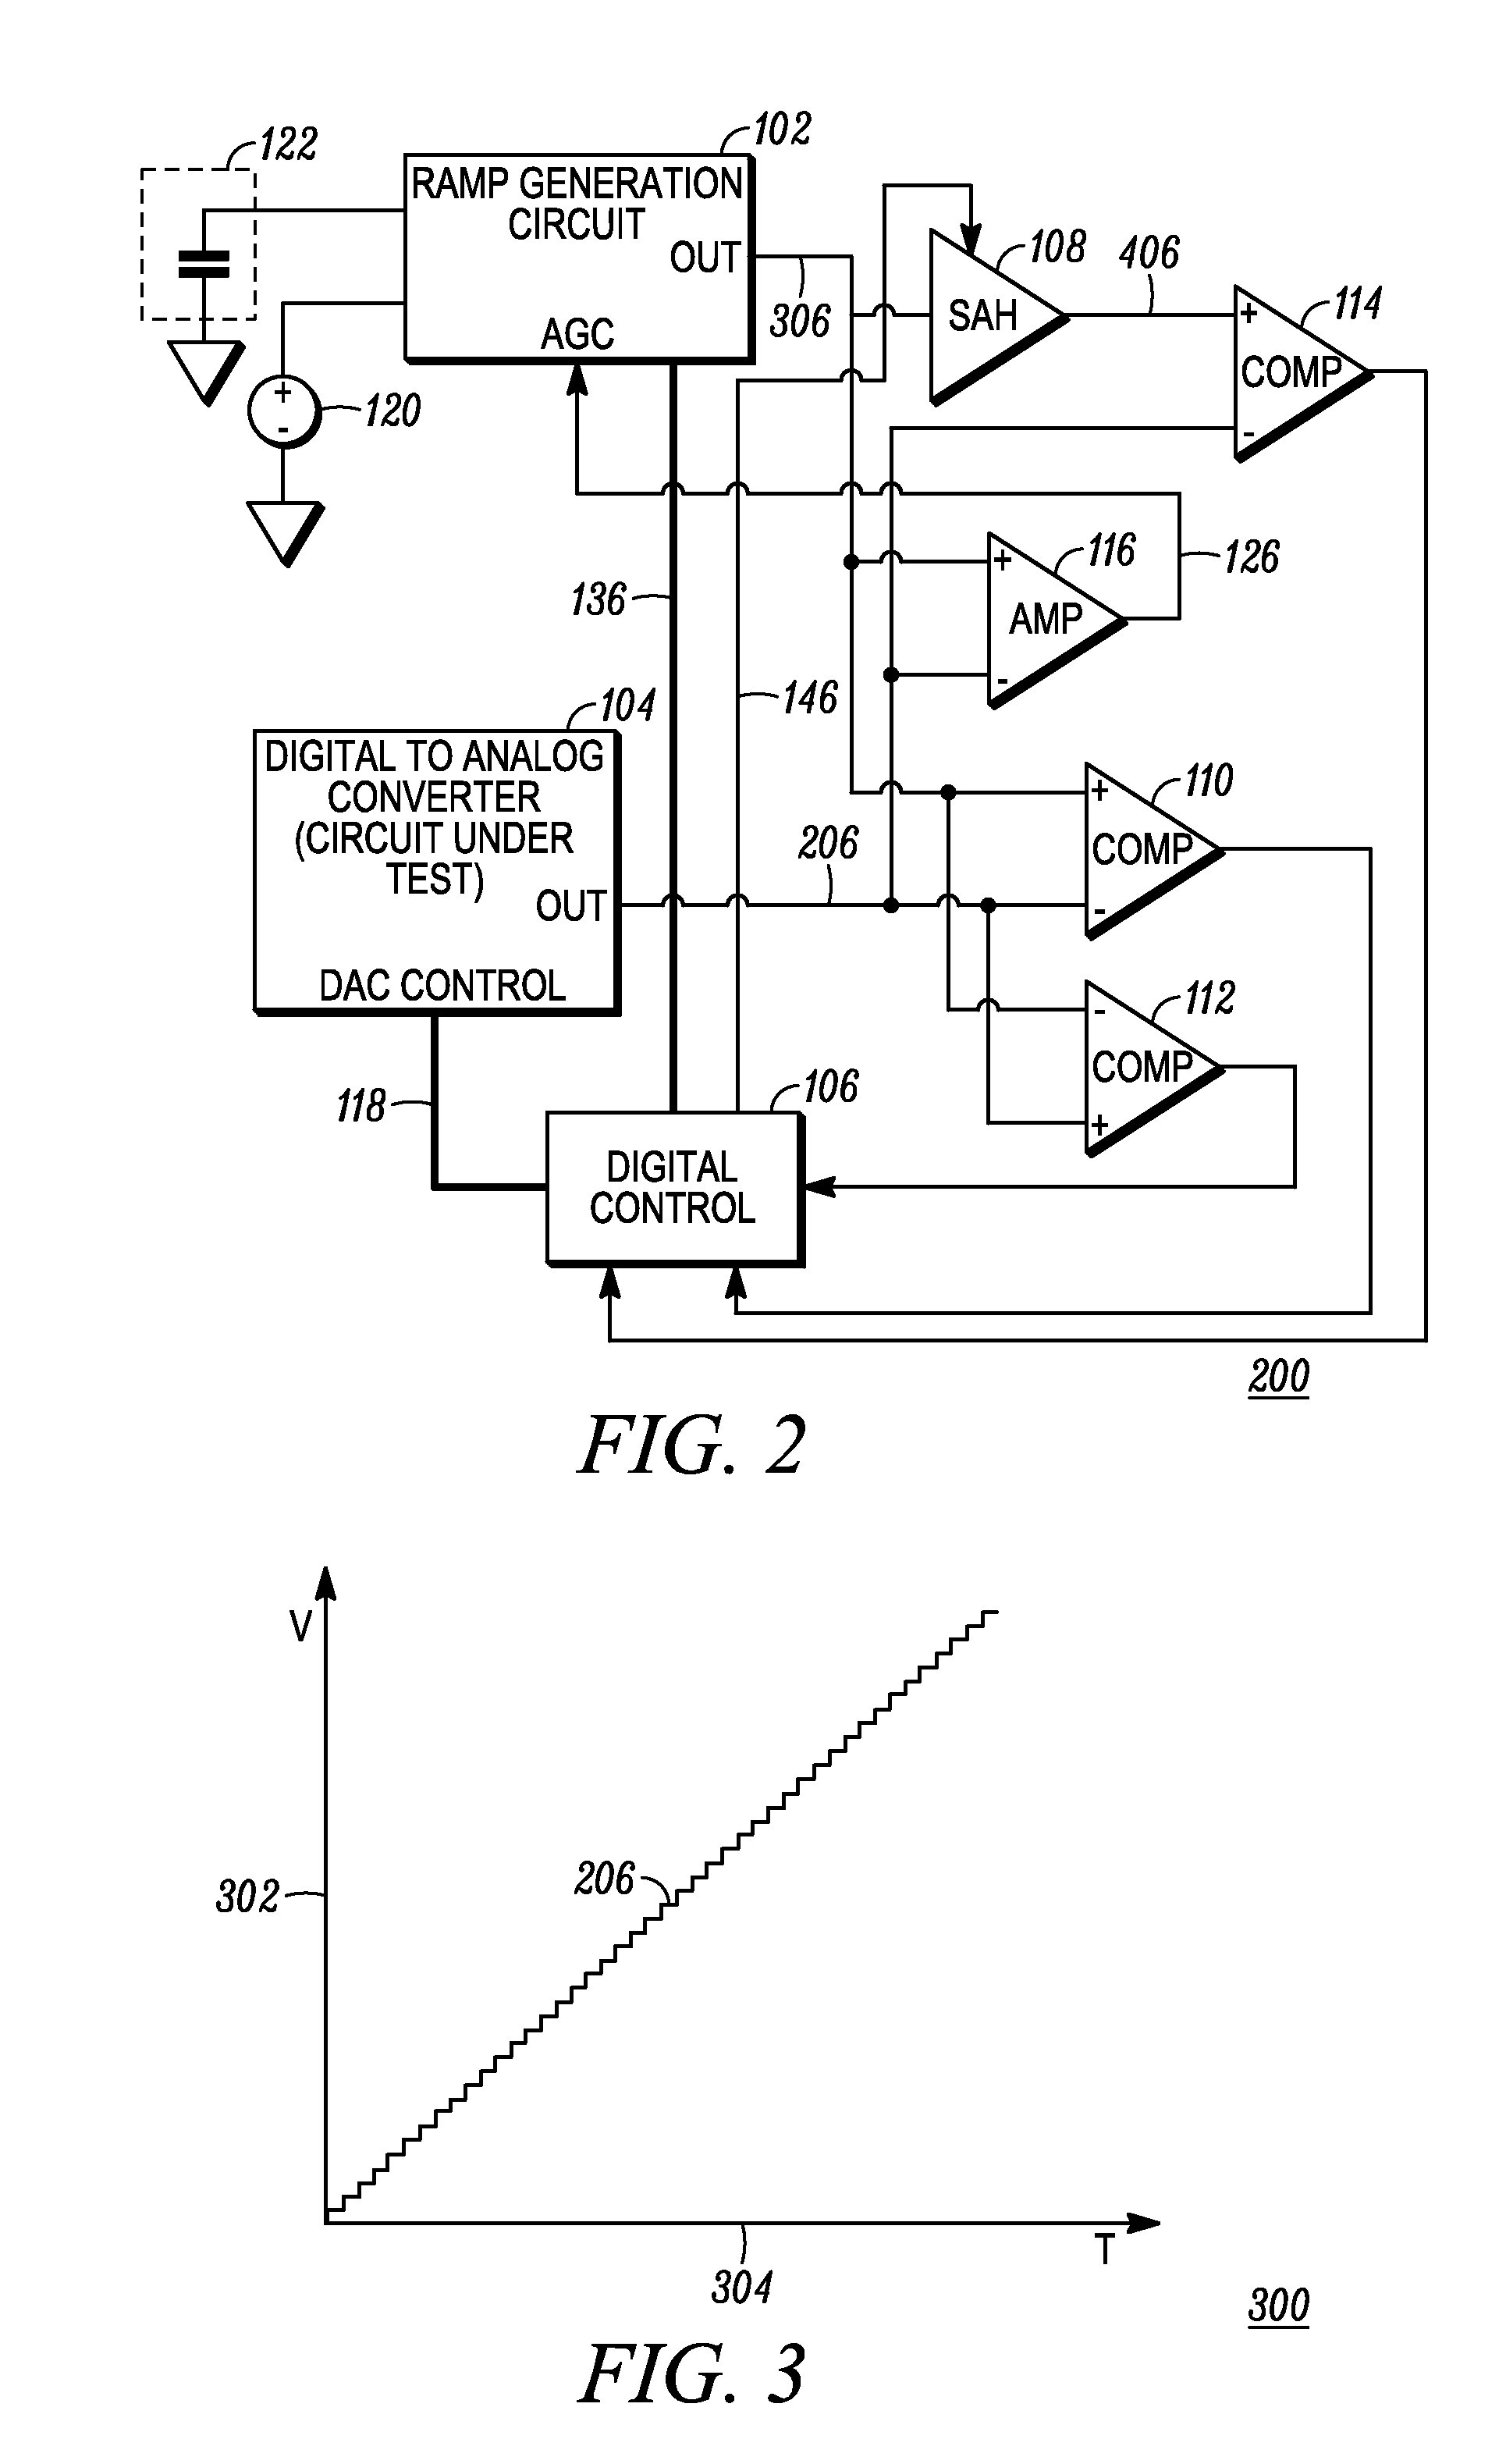 Method and apparatus for self-testing a digital-to-analog converter (DAC) in an integrated circuit